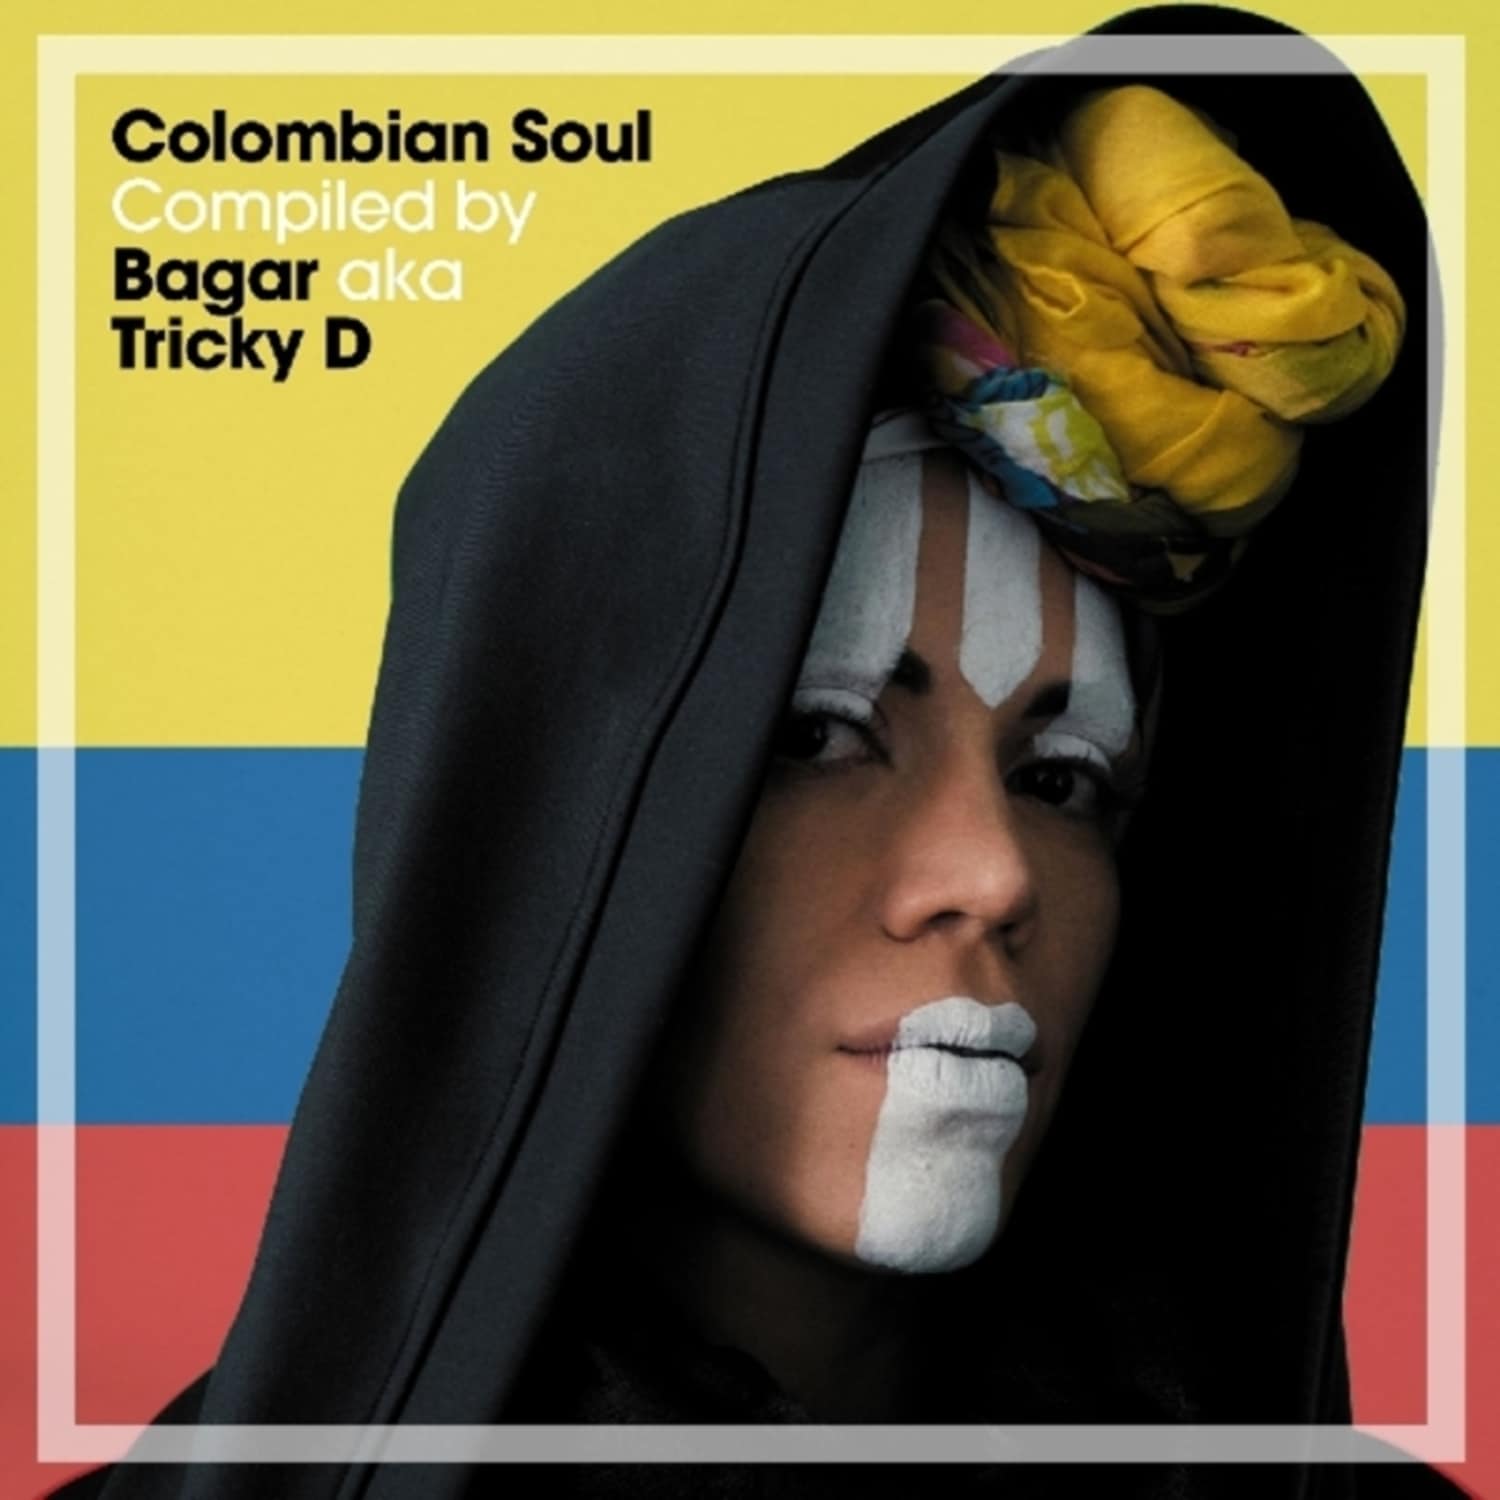 VA compiled By Bagar aka Tricky D - COLOMBIAN SOUL 